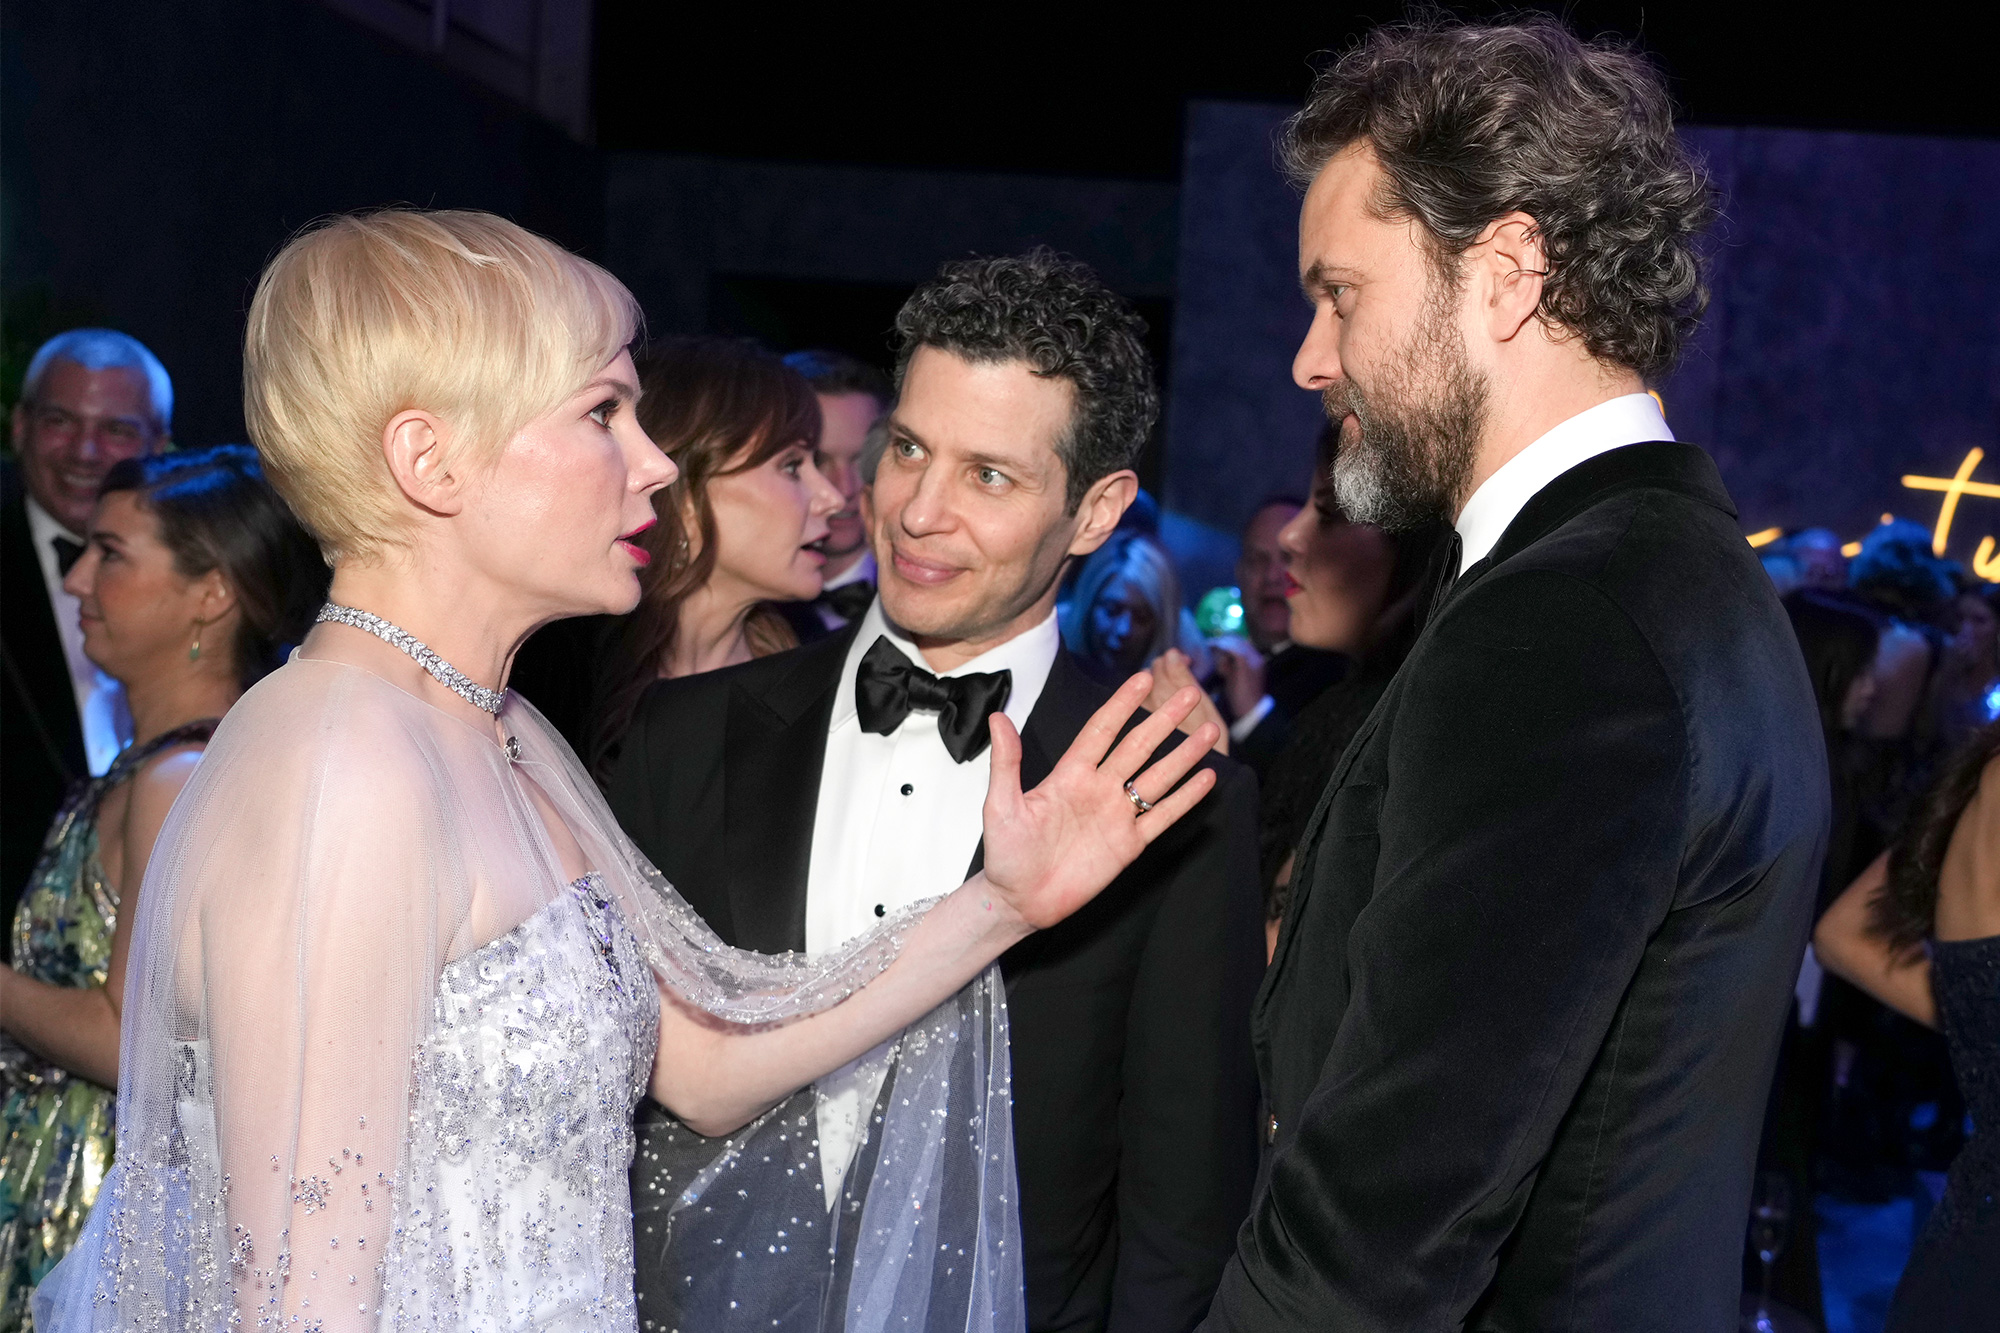 'Dawson's Creek' alums Michelle Williams and Joshua Jackson reunite after the 2023 'Vanity Fair' Oscars after-party